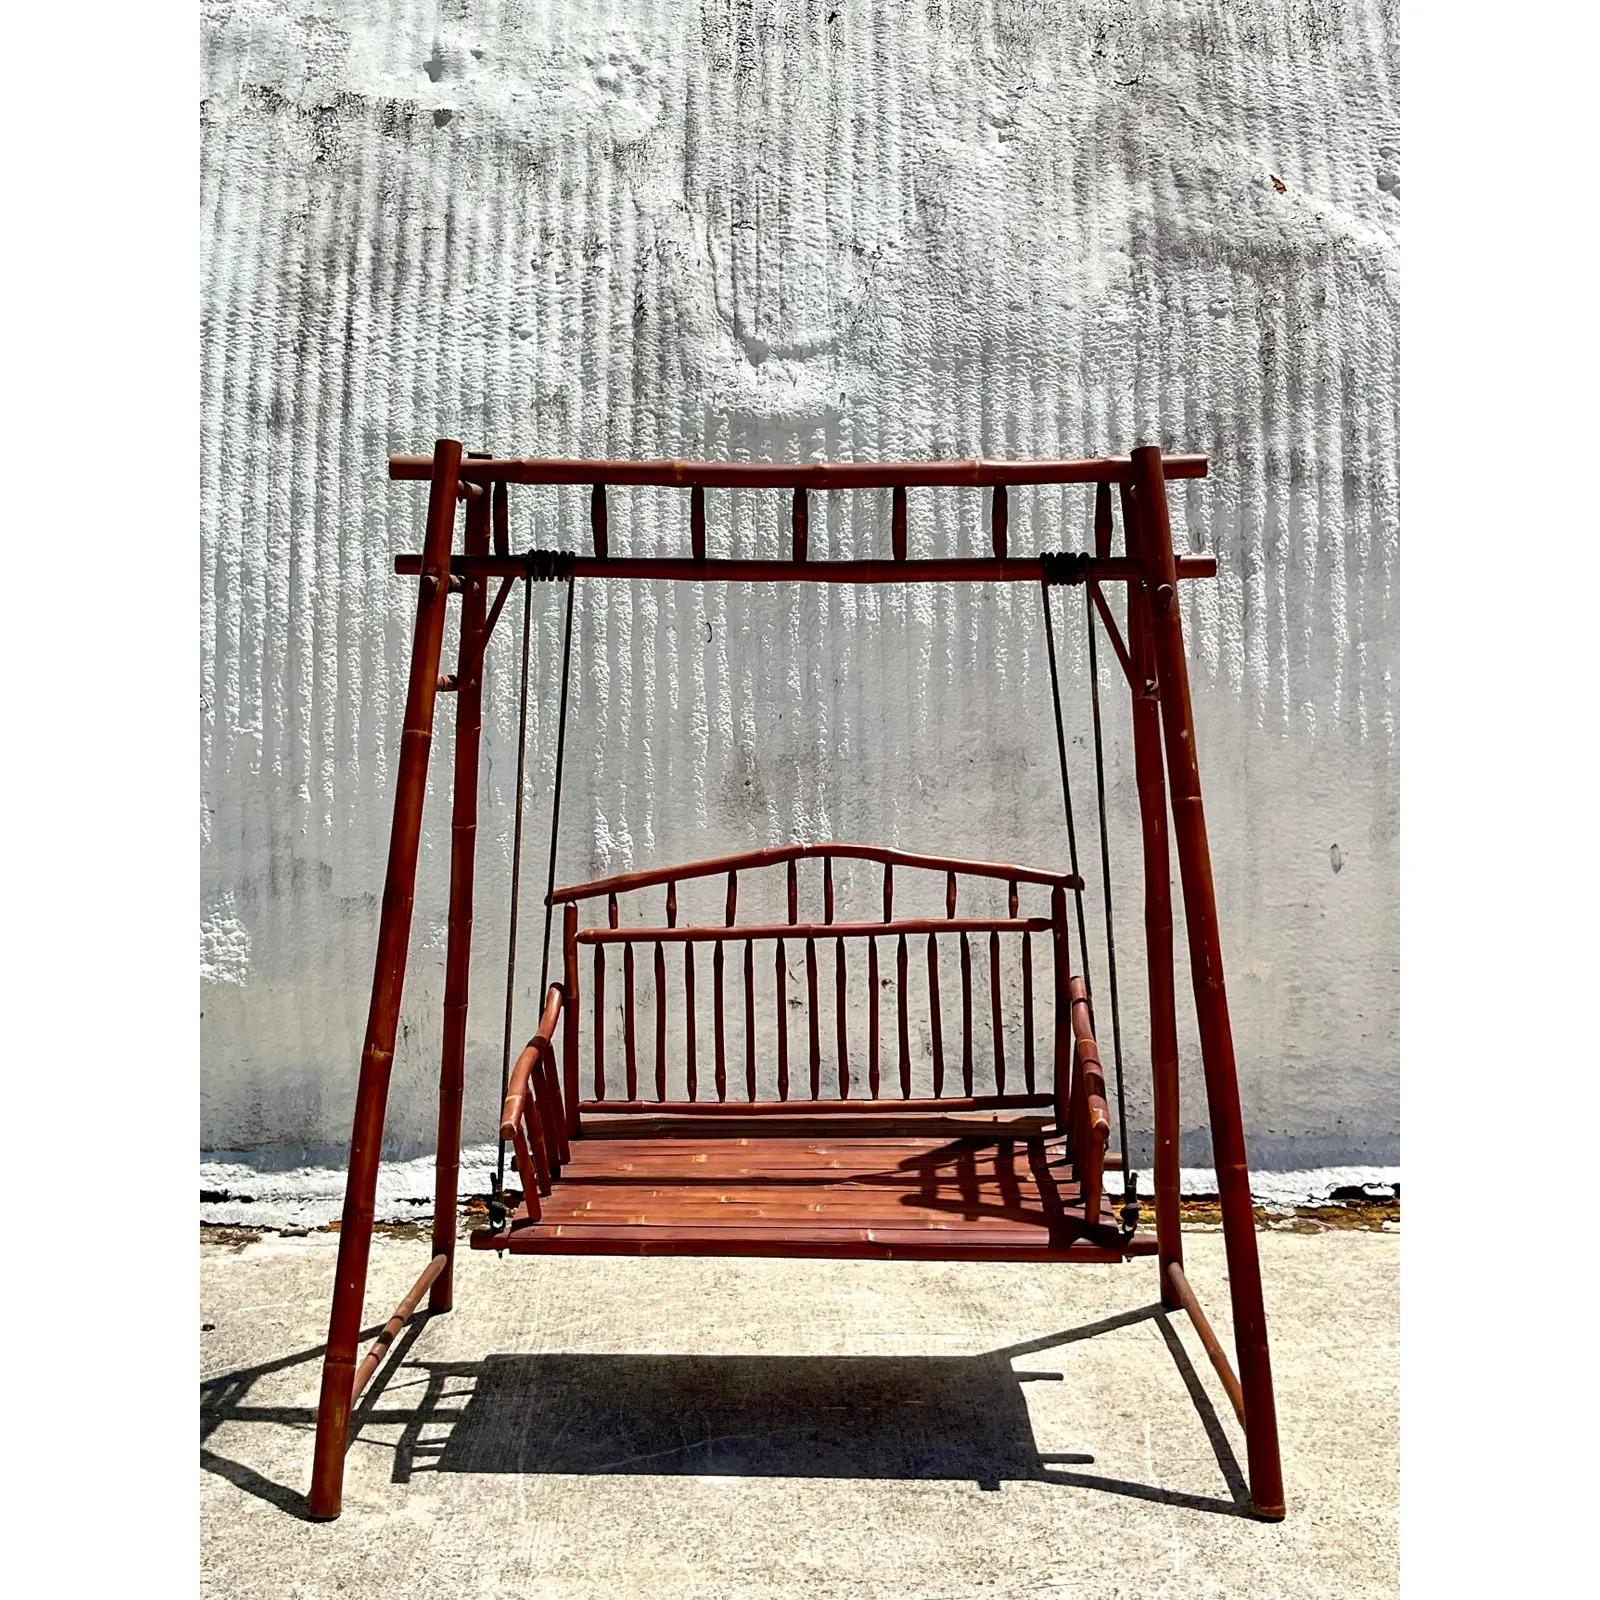 North American Vintage Coastal Outdoor Bamboo and Rattan Porch Swing